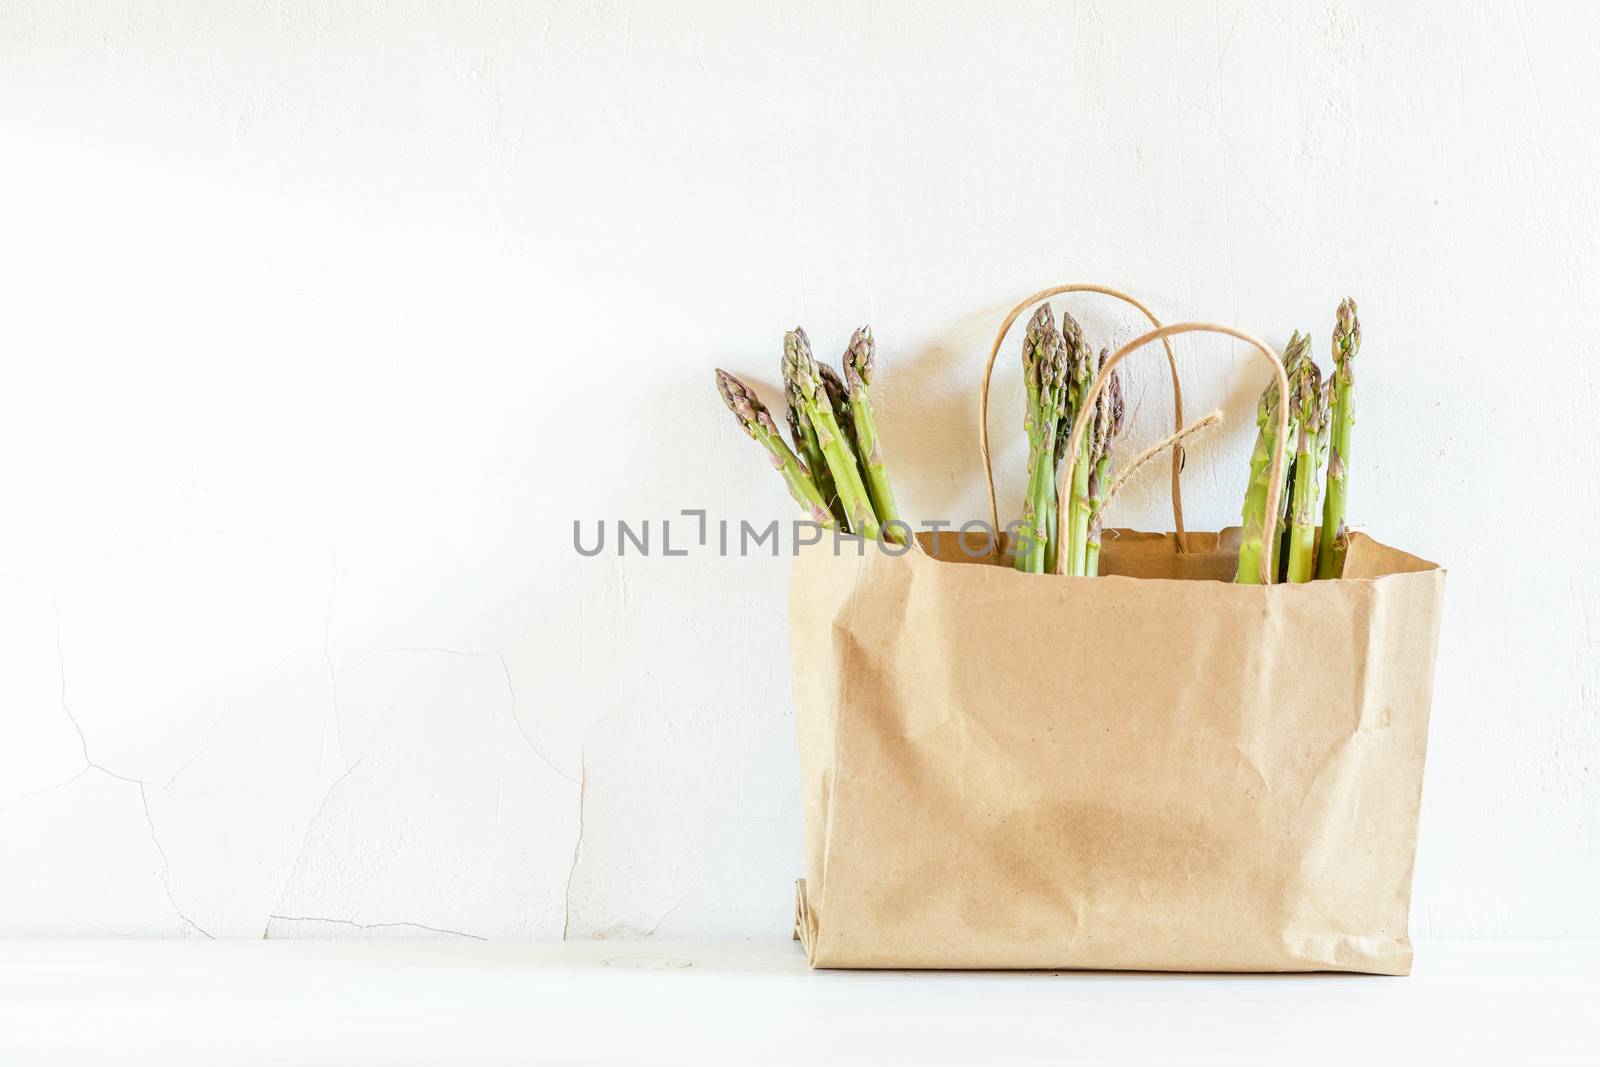 Bunches of fresh asparagus in a paper bag on white cracked wall background. Copy space